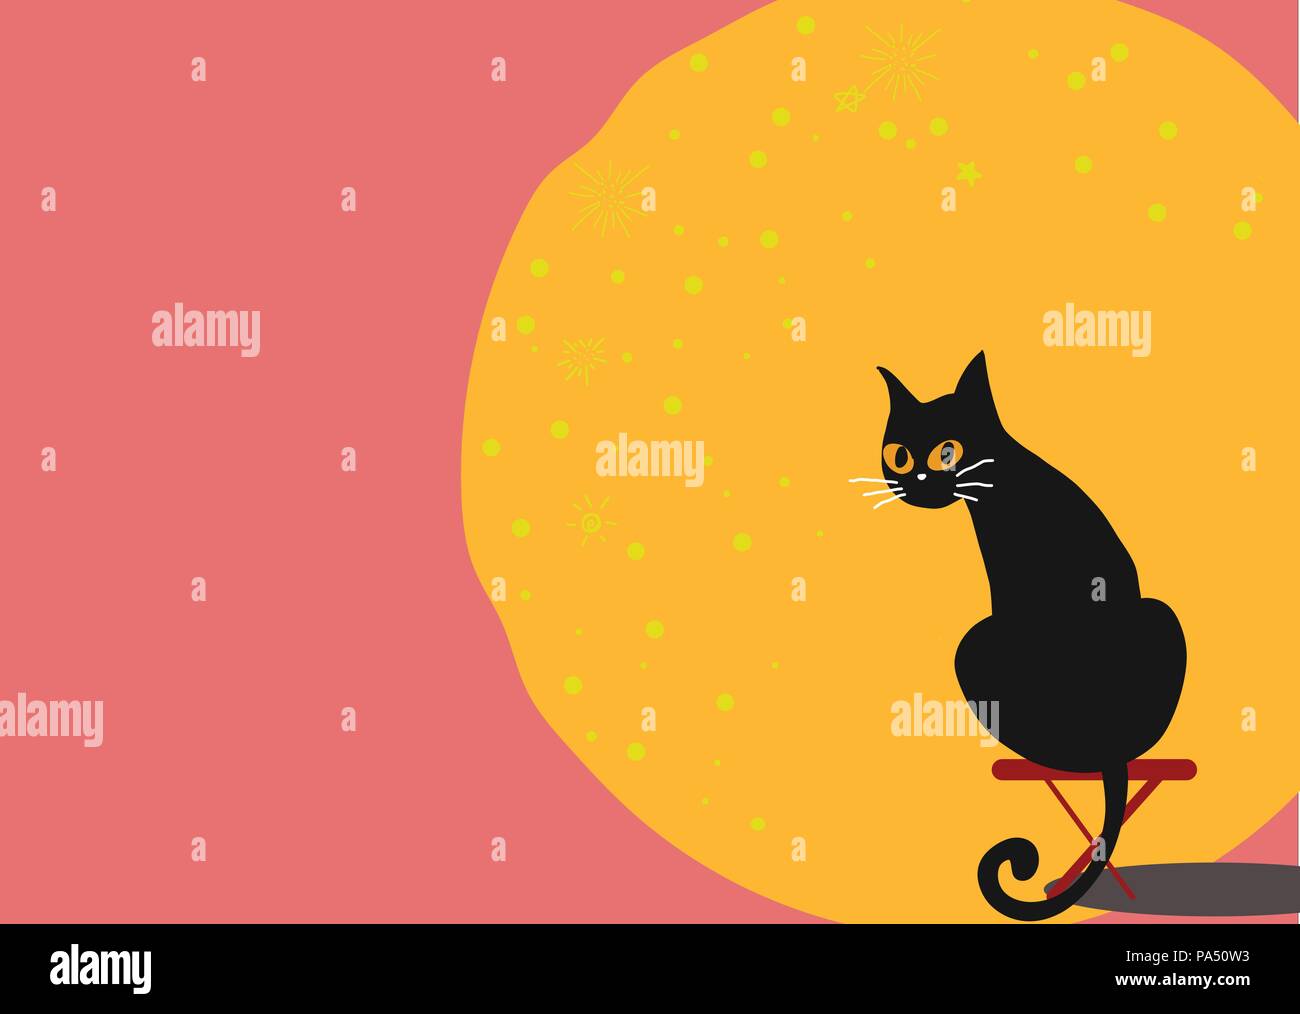 Black Cat Sits On Red Chair With Full Moon On Pink Background